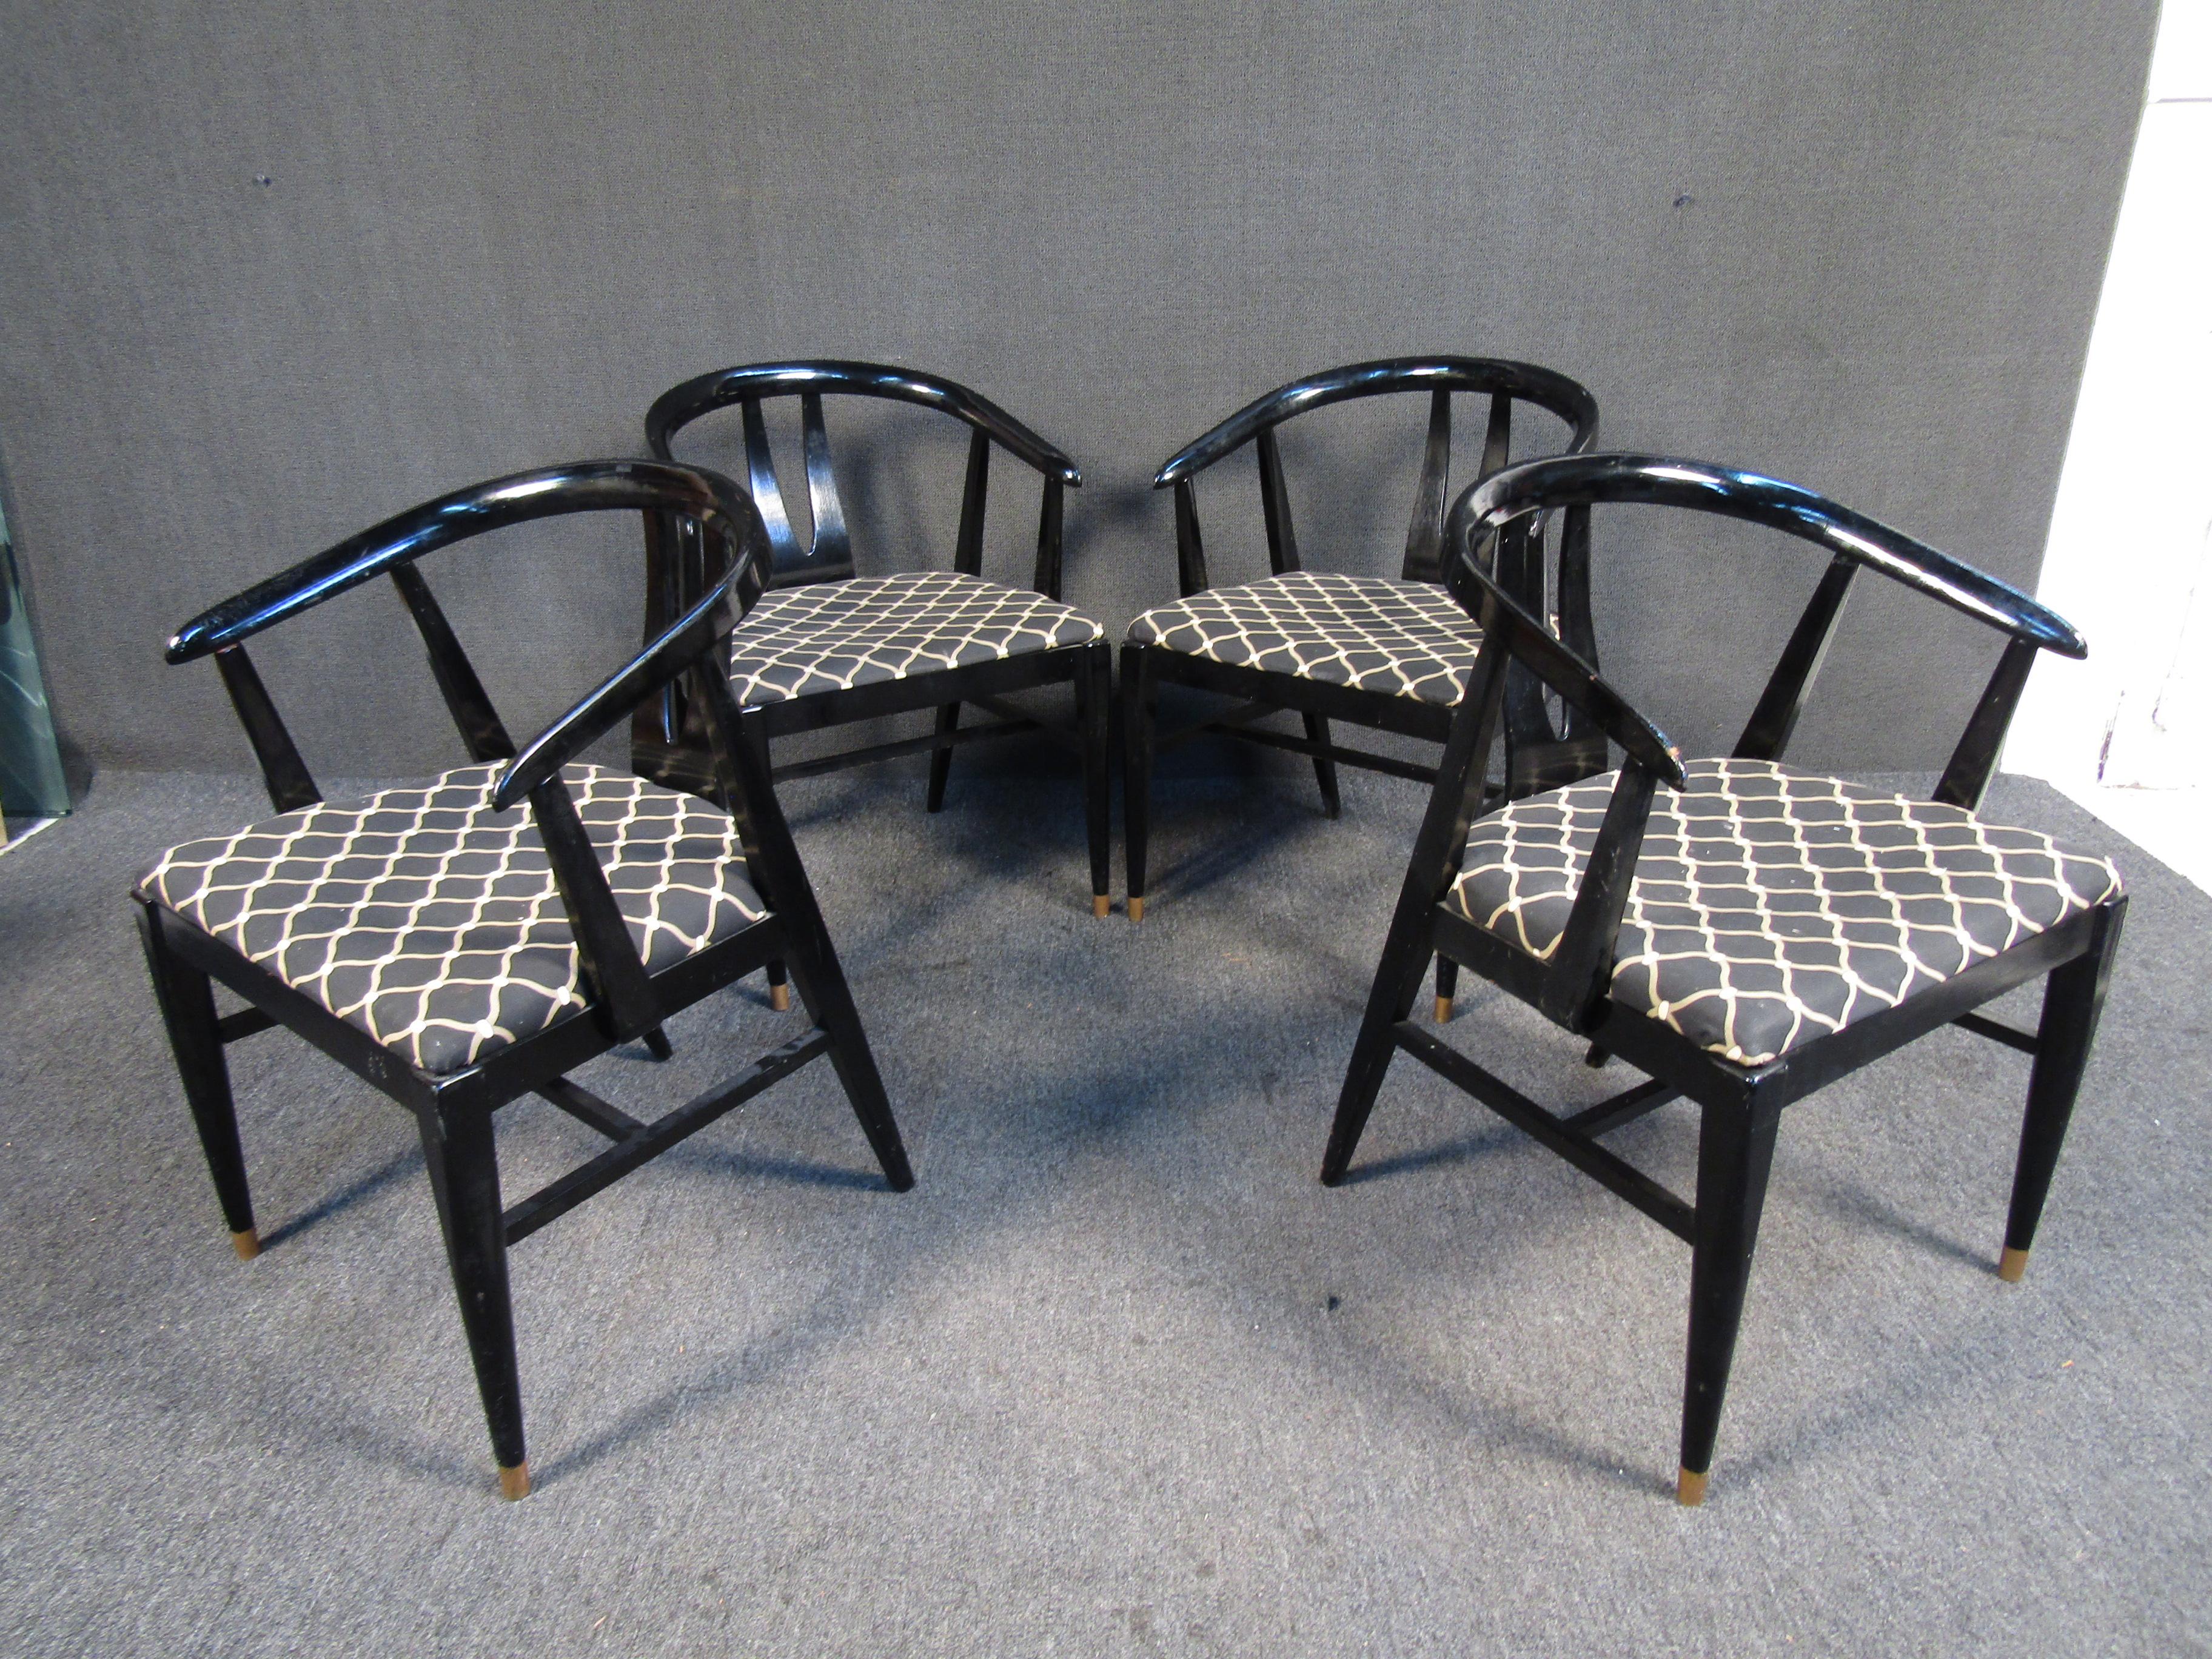 This vintage set of chairs combines an elegant black lacquered finish with patterned upholstery and brass footing. Please confirm item location with seller (NY/NJ).